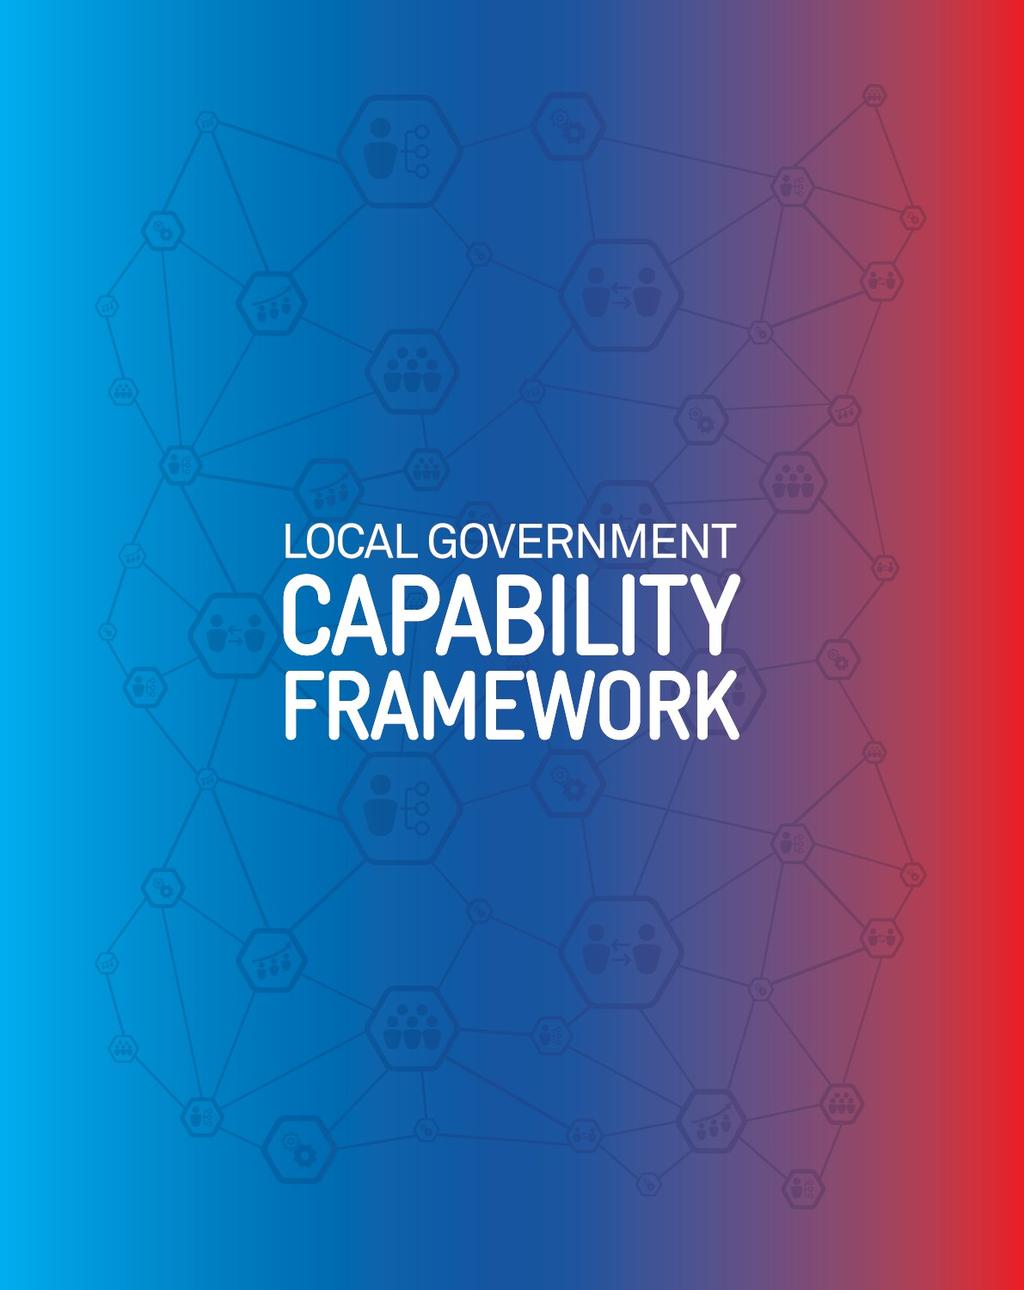 CREATING LOCAL GOVERNMENT